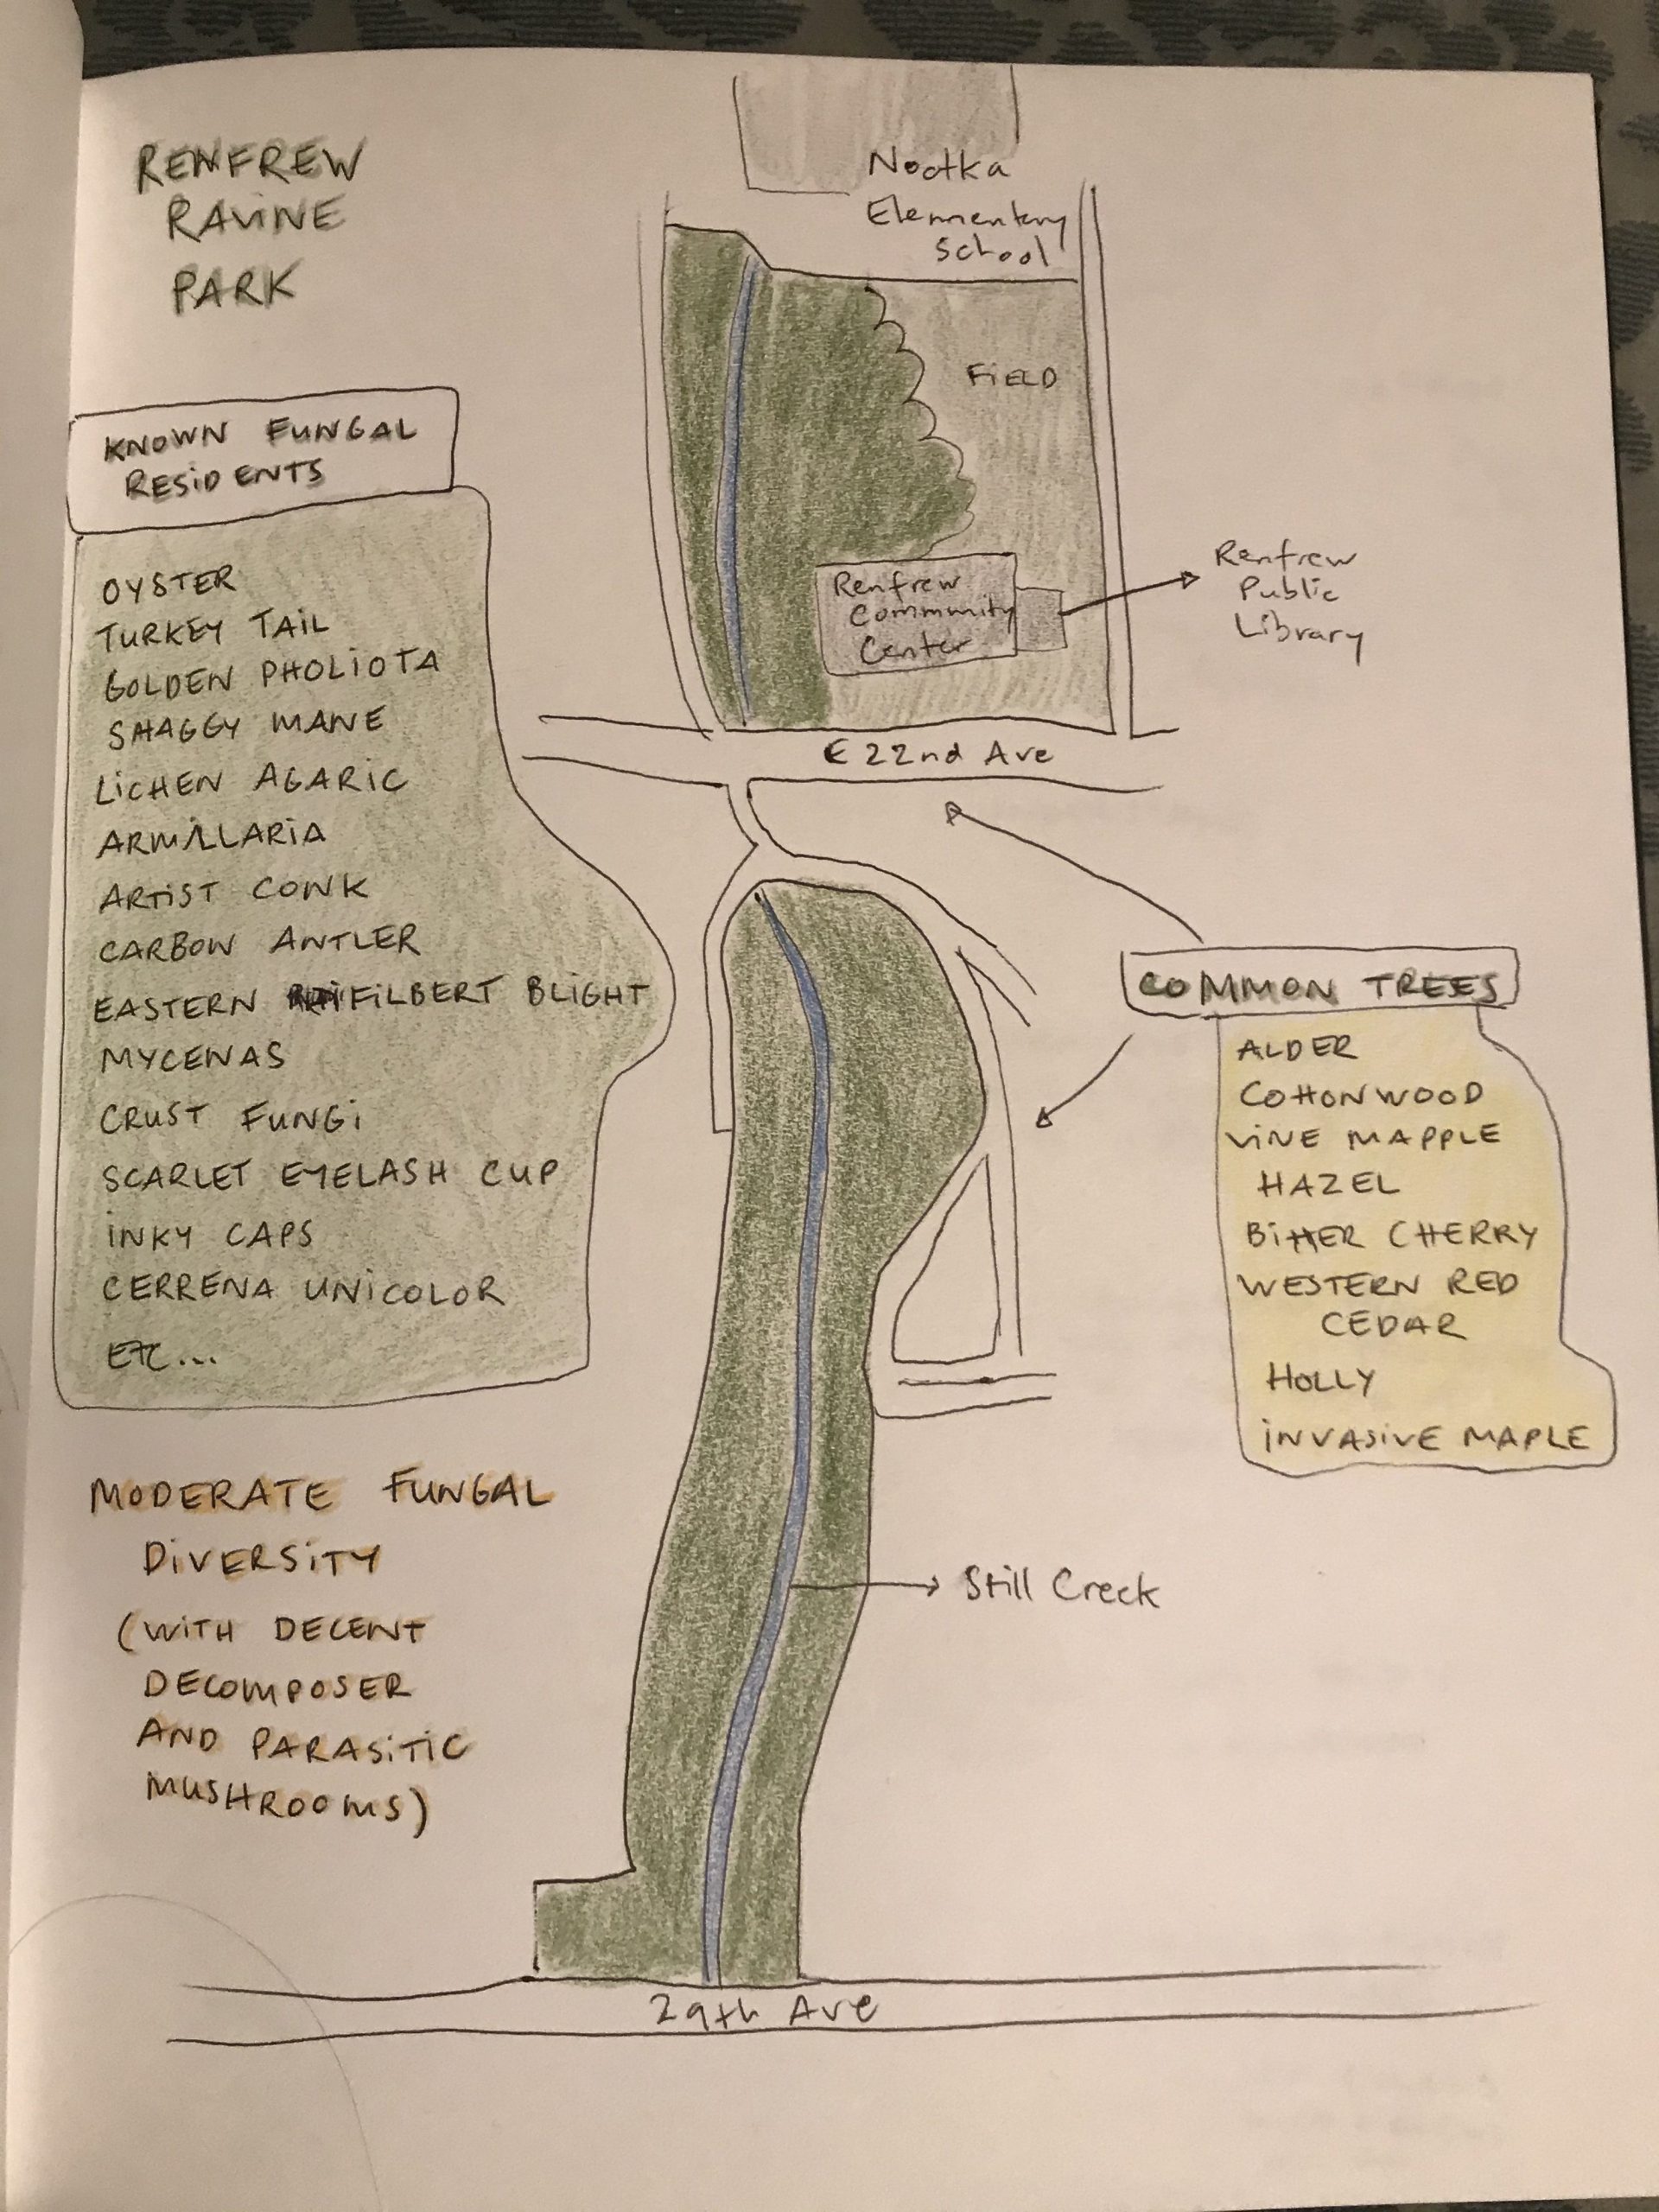 A hand drawn map of Renfrew Ravine Park with a list of known fungal residents.